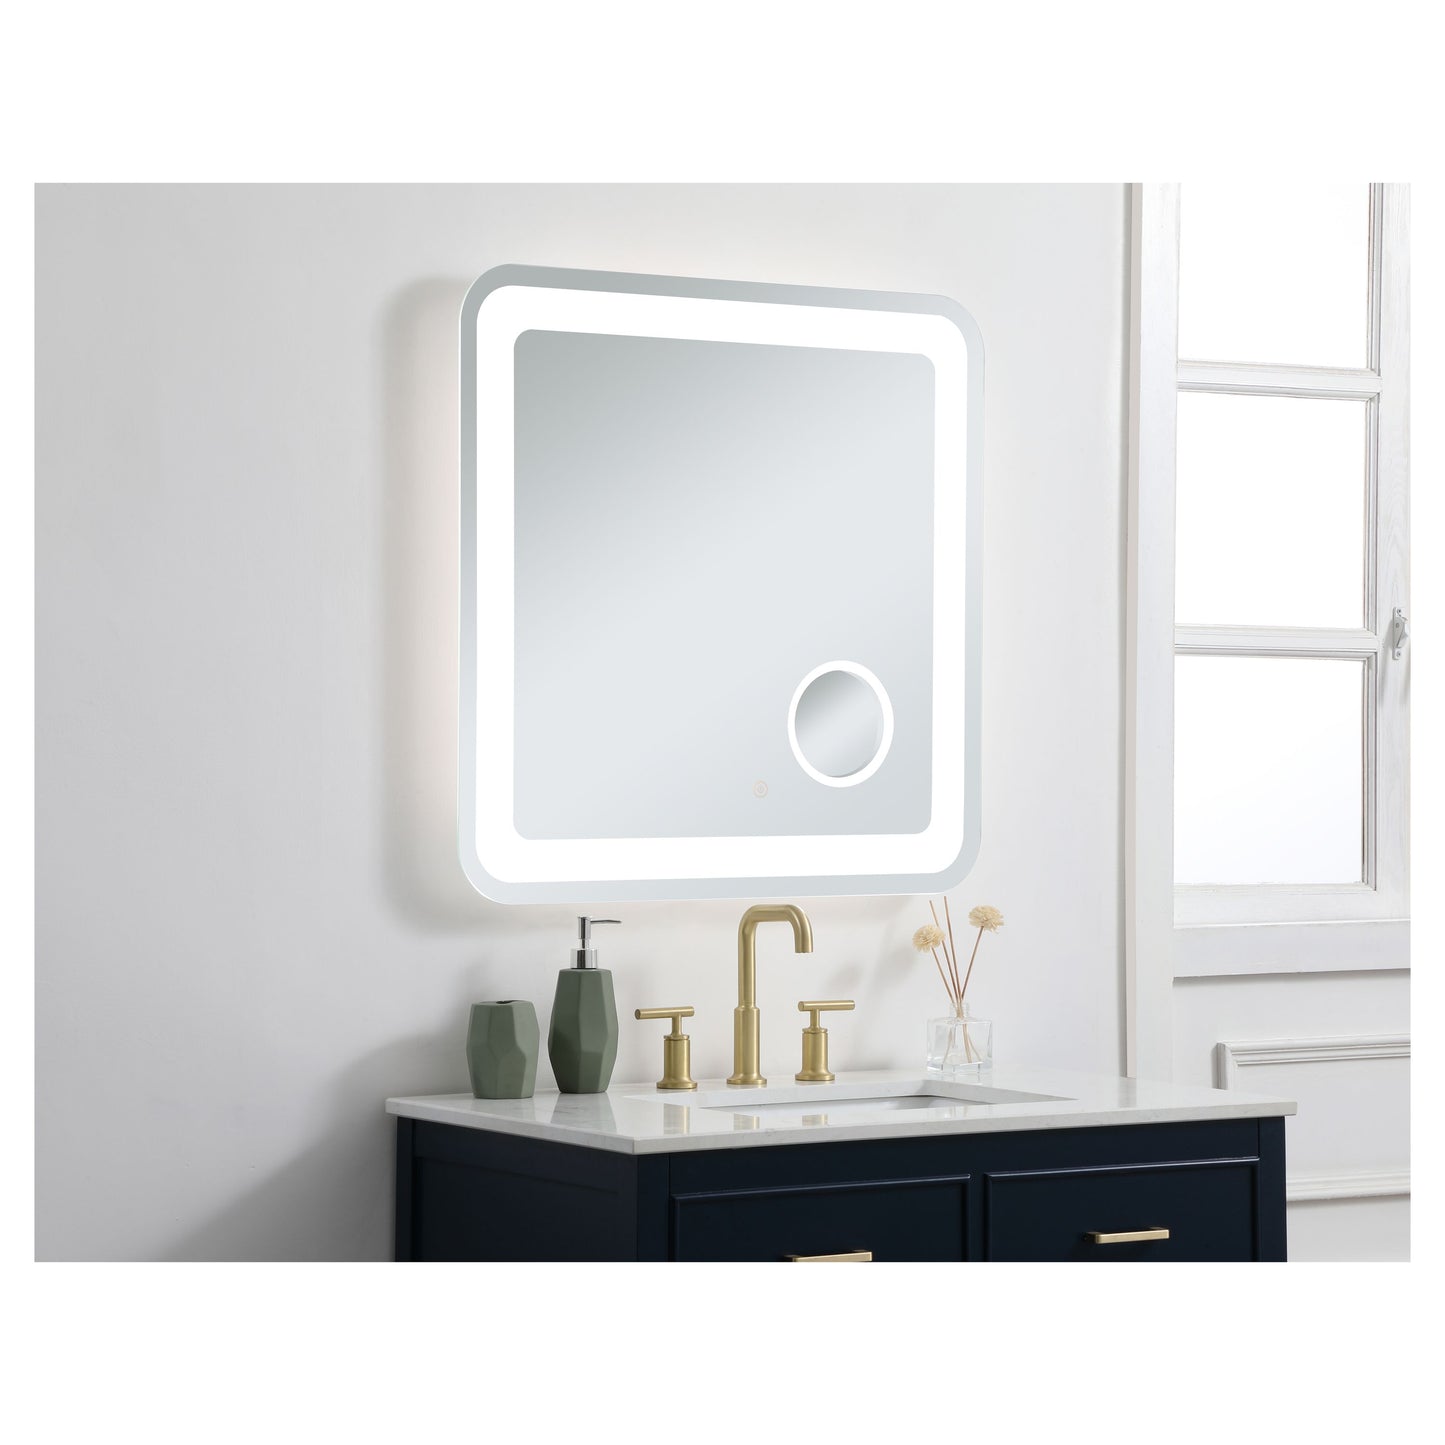 MRE53030 Lux 30" x 30" LED Mirror in Glossy White - Adjustable Color Temp